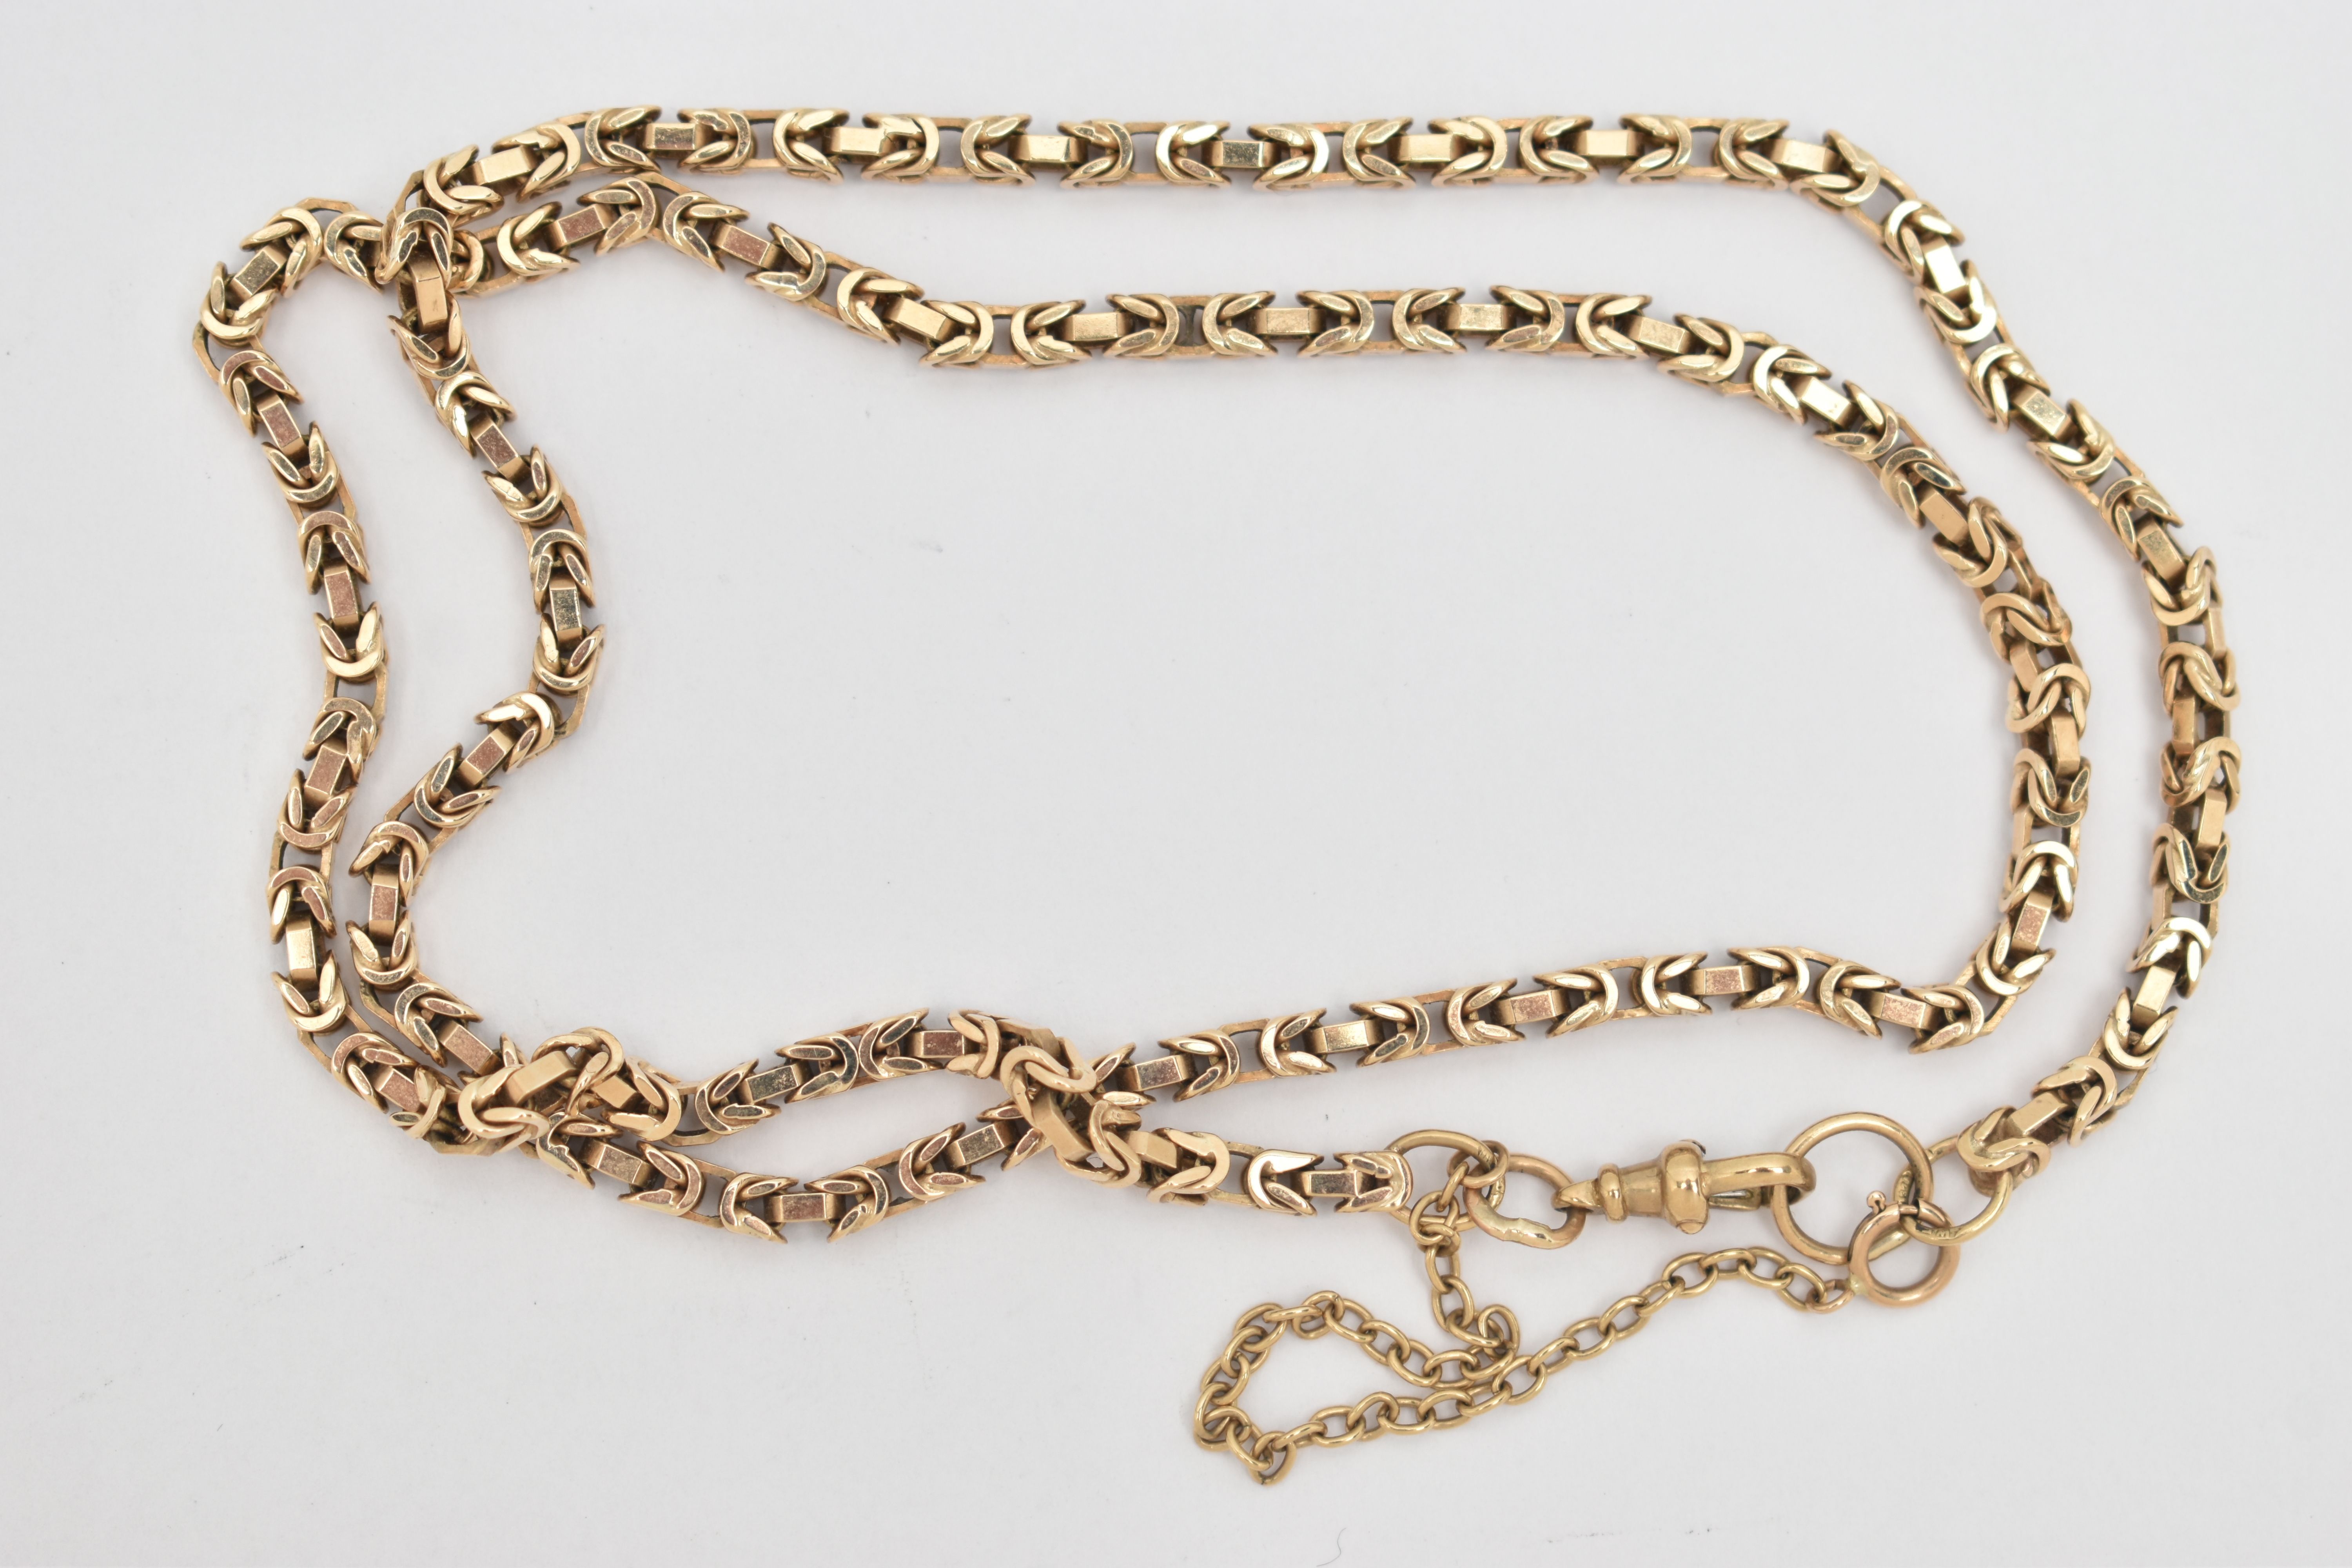 A 9CT YELLOW GOLD NECKLACE, designed as a Byzantine chain with lobster claw clasp, hallmarked 9ct